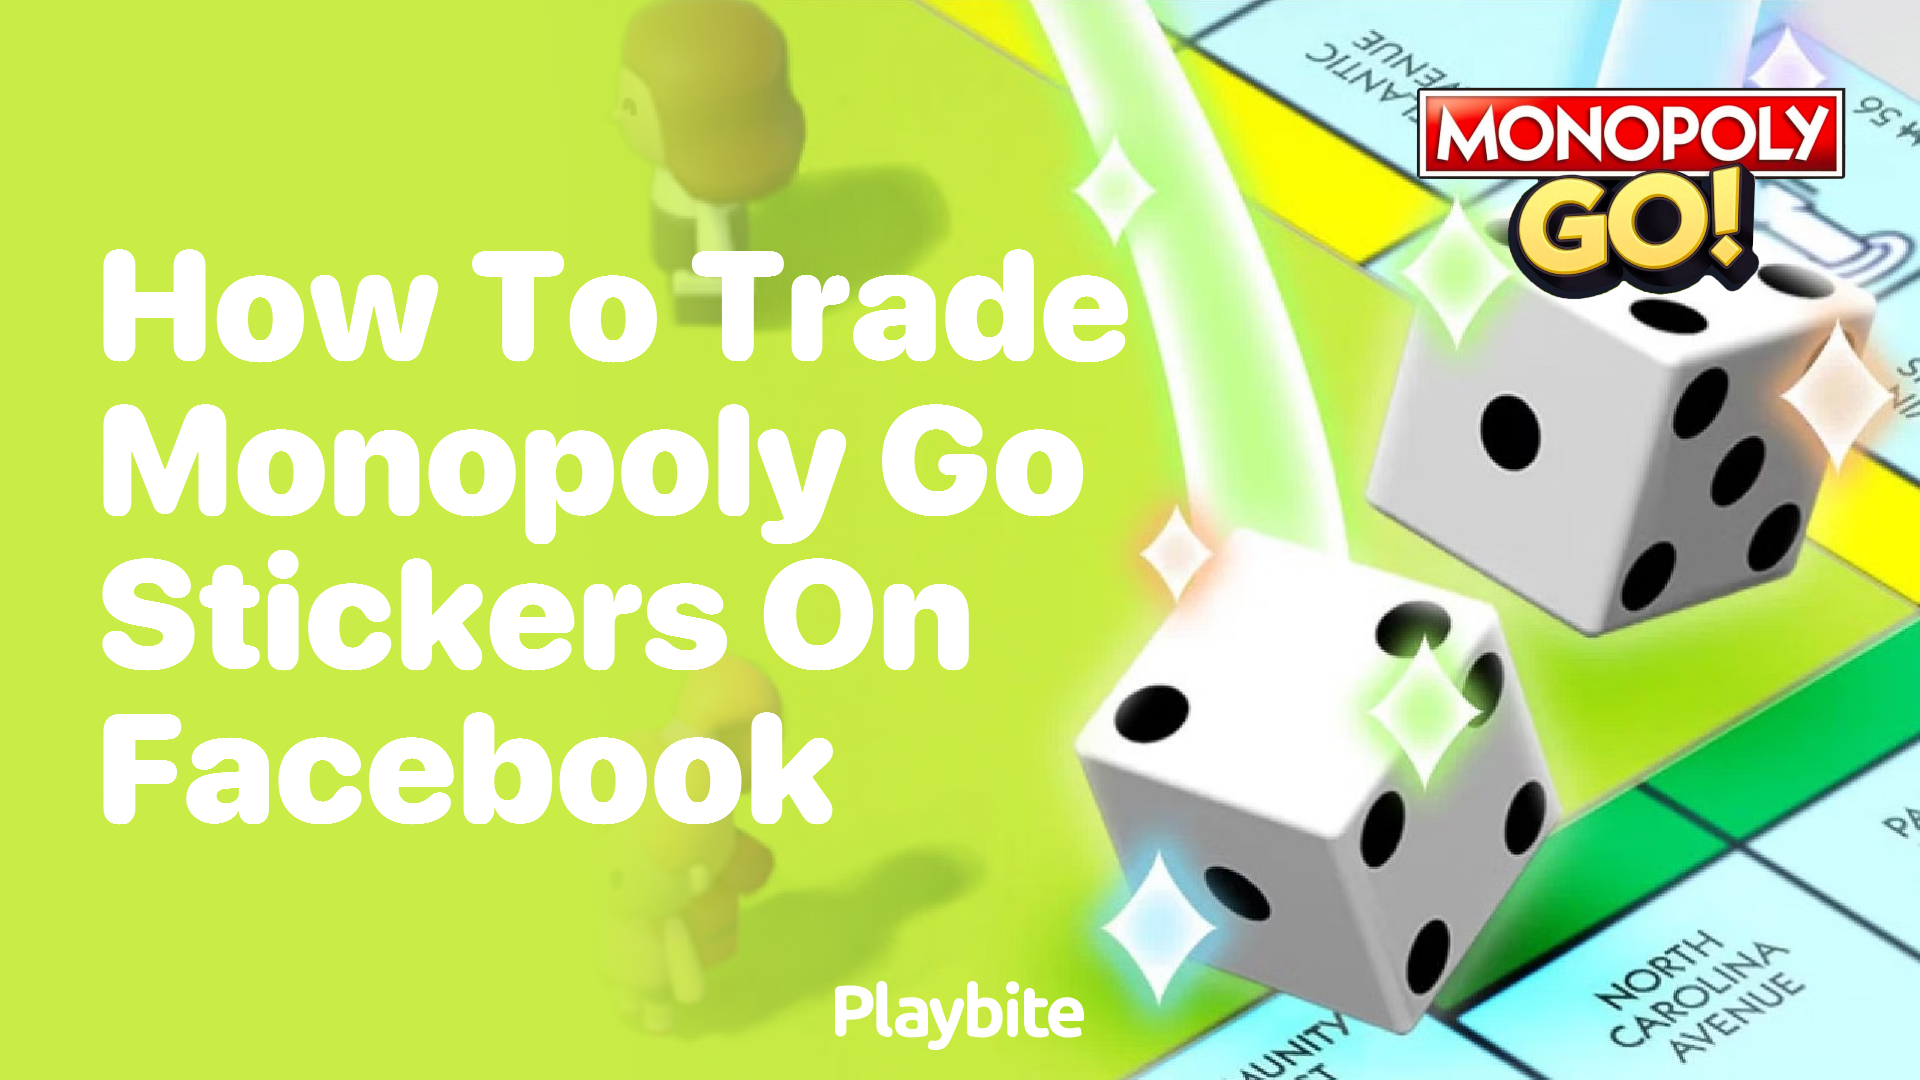 How to Trade Monopoly Go Stickers on Facebook